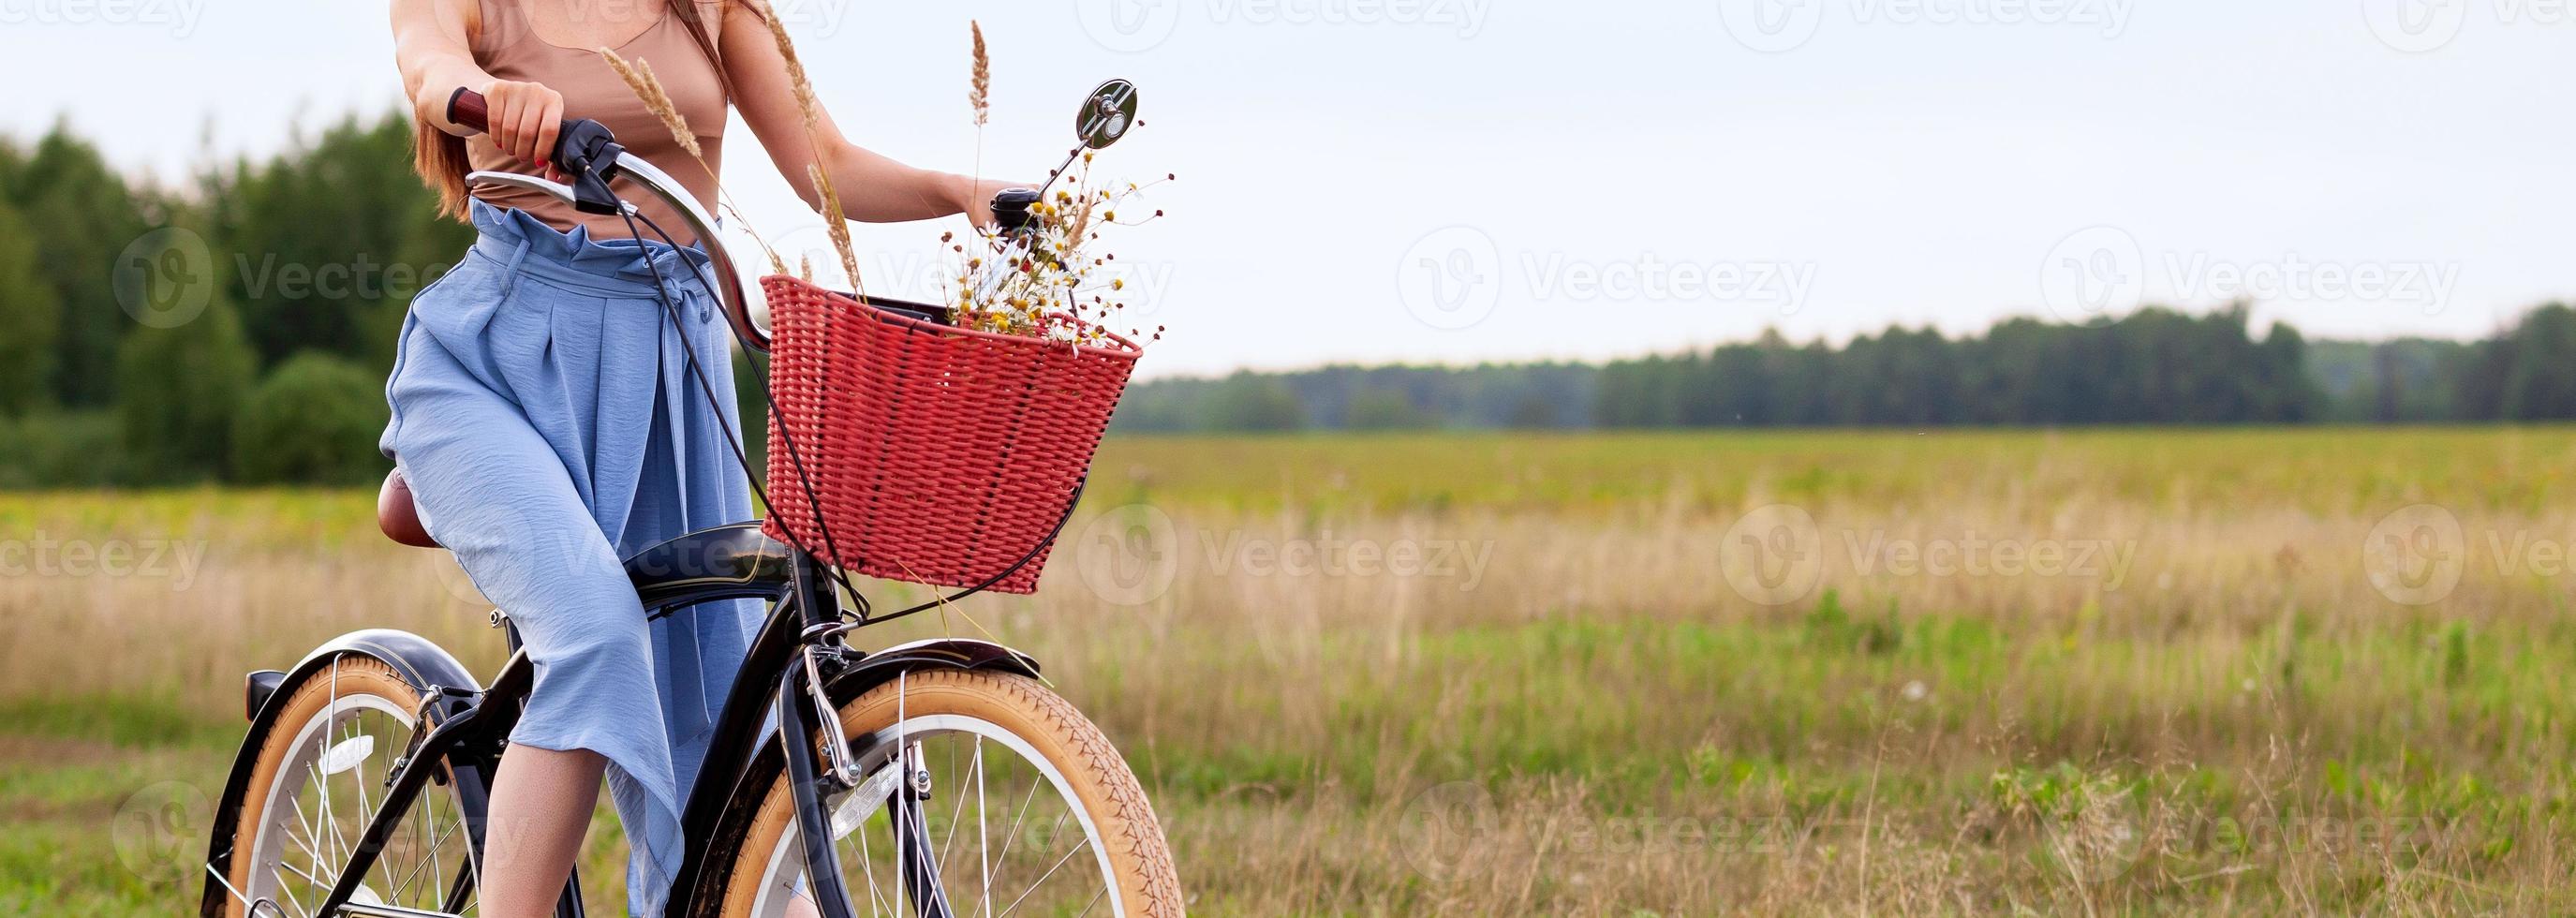 Girl on a bike in the countryside photo